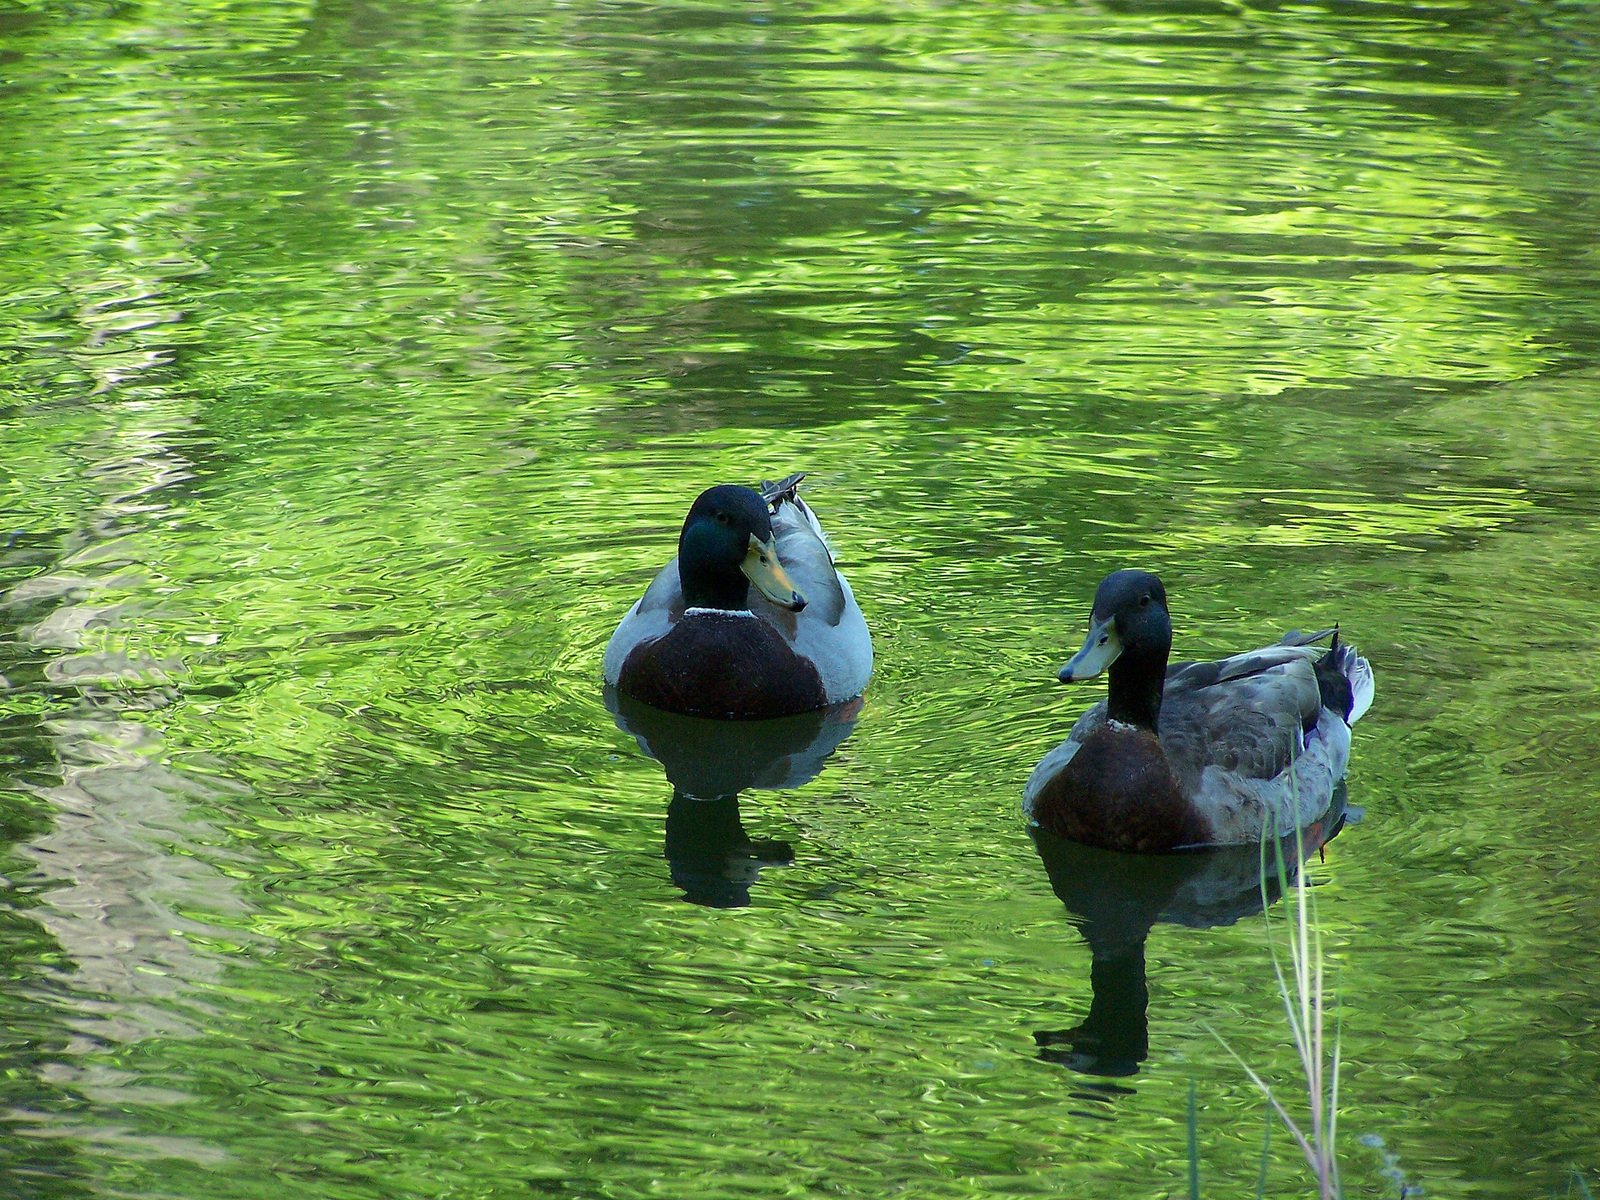 two ducks are floating down the green water